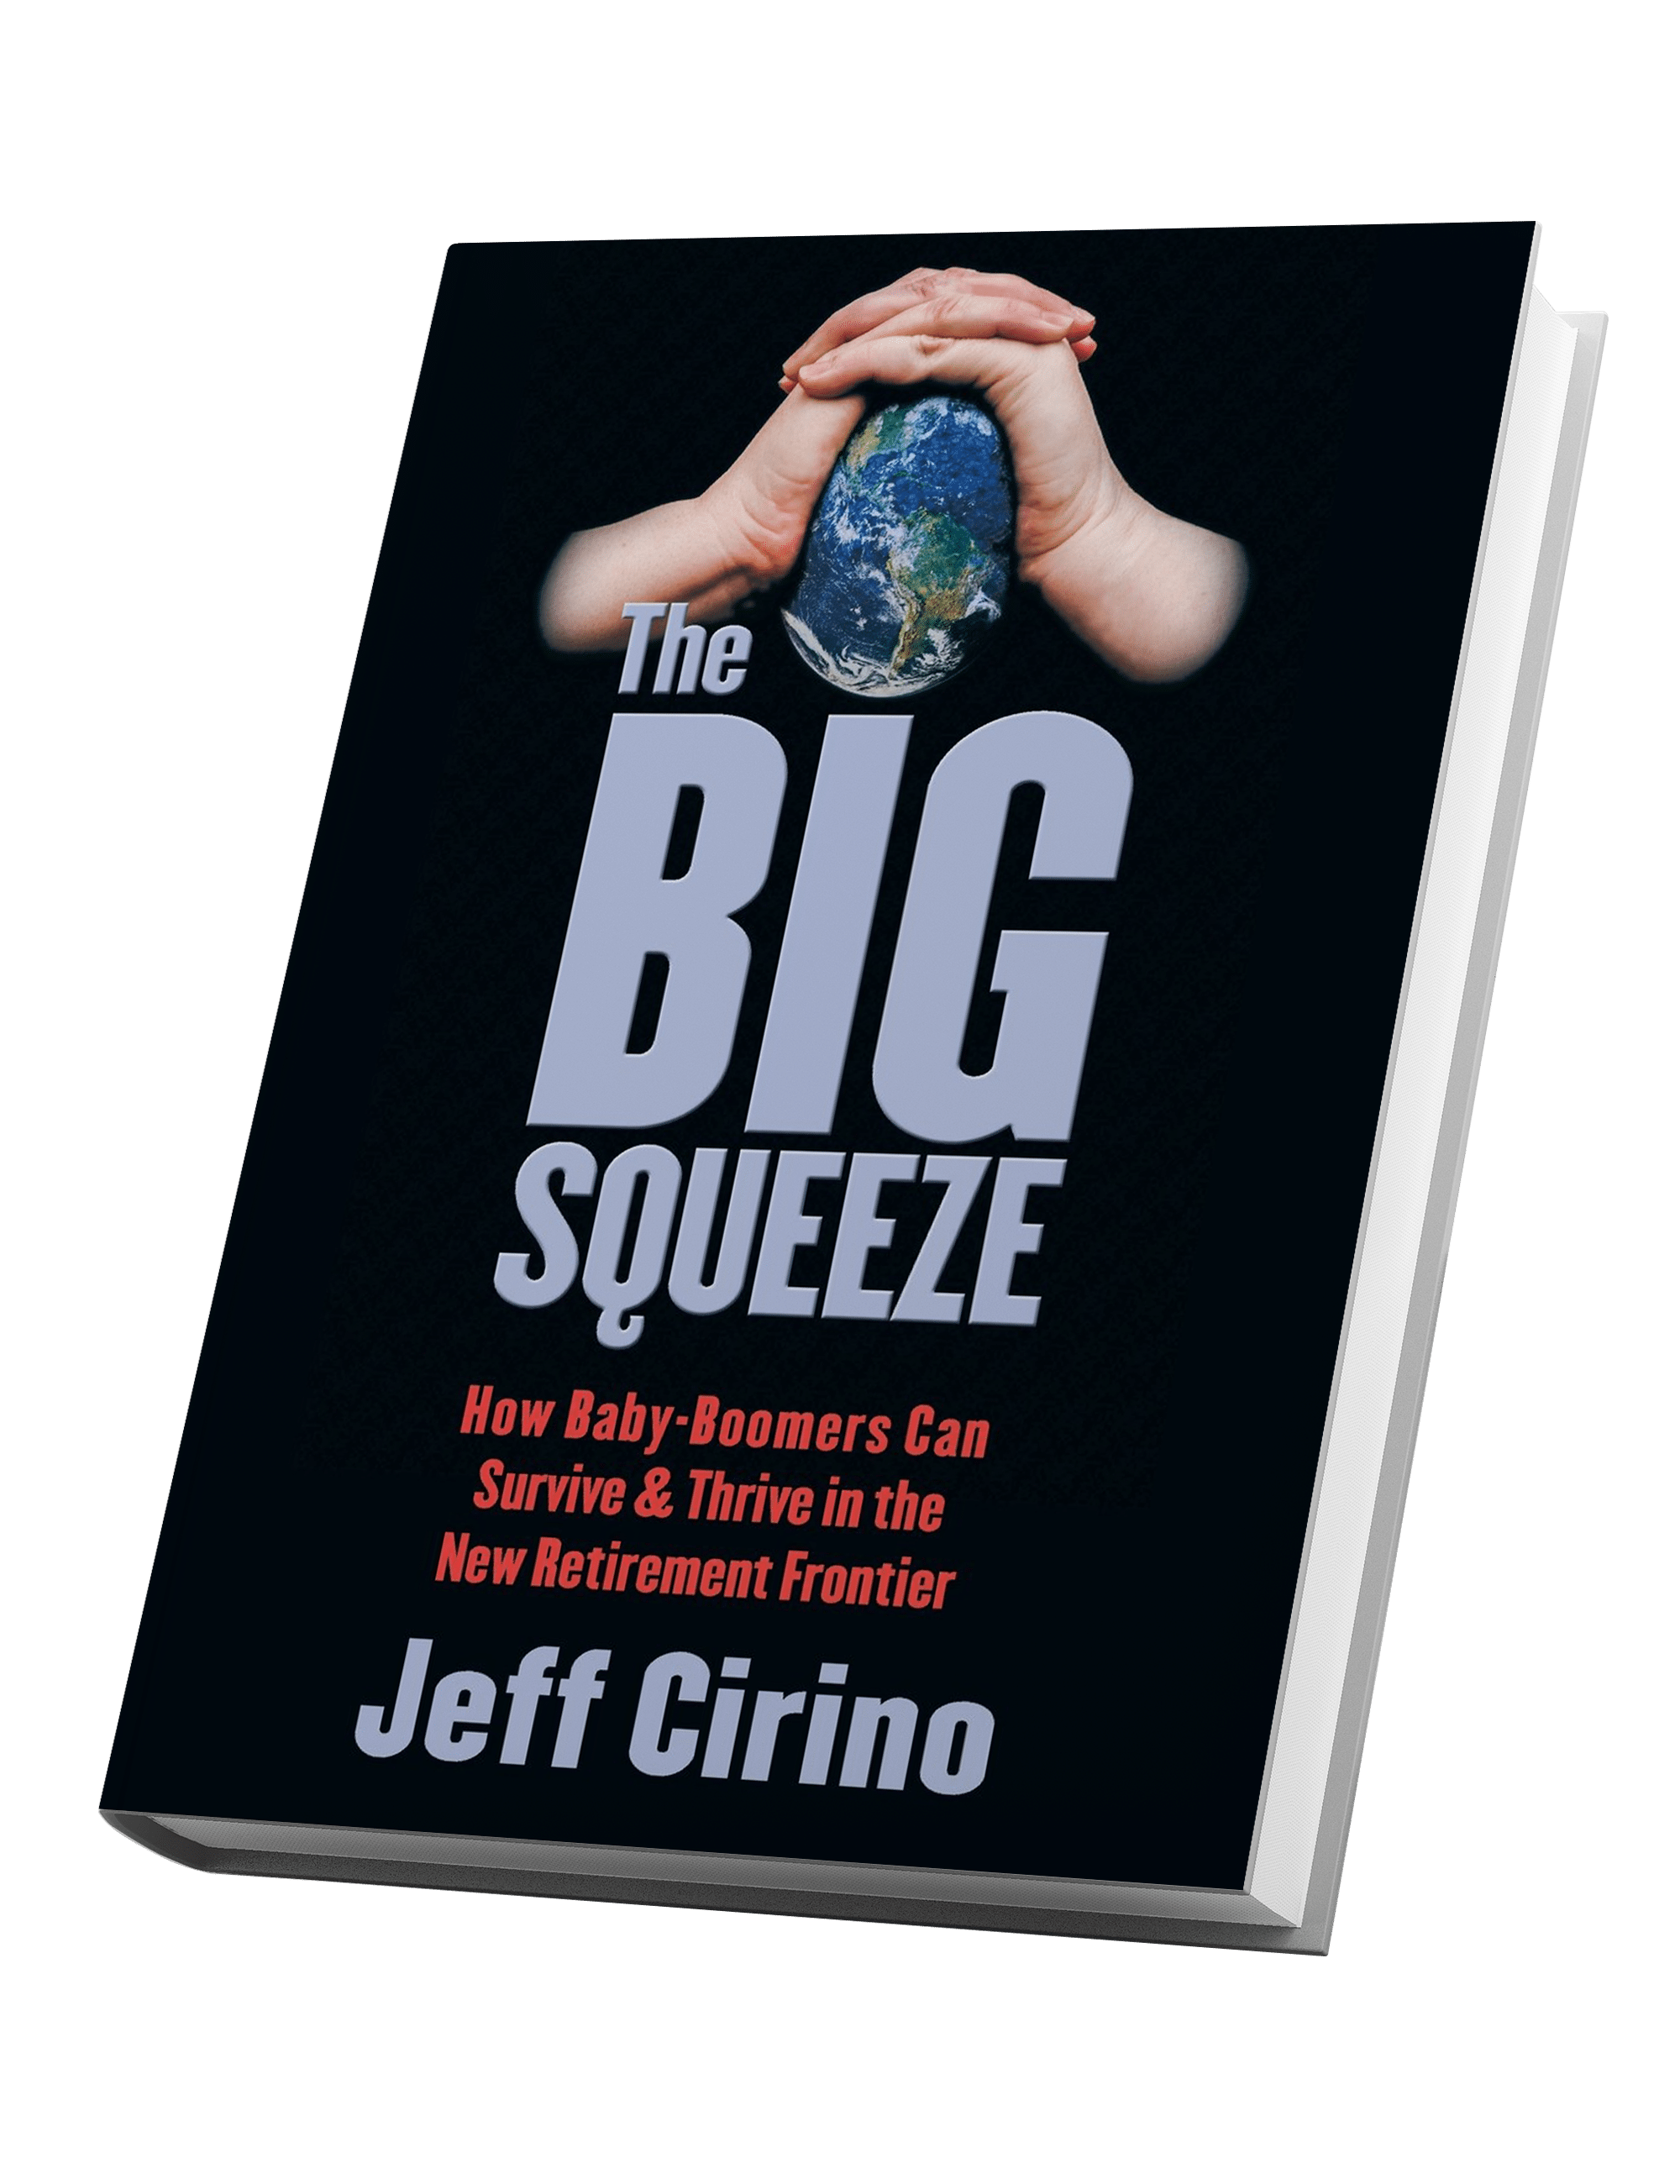 The Big Squeeze Cover Photo mockup